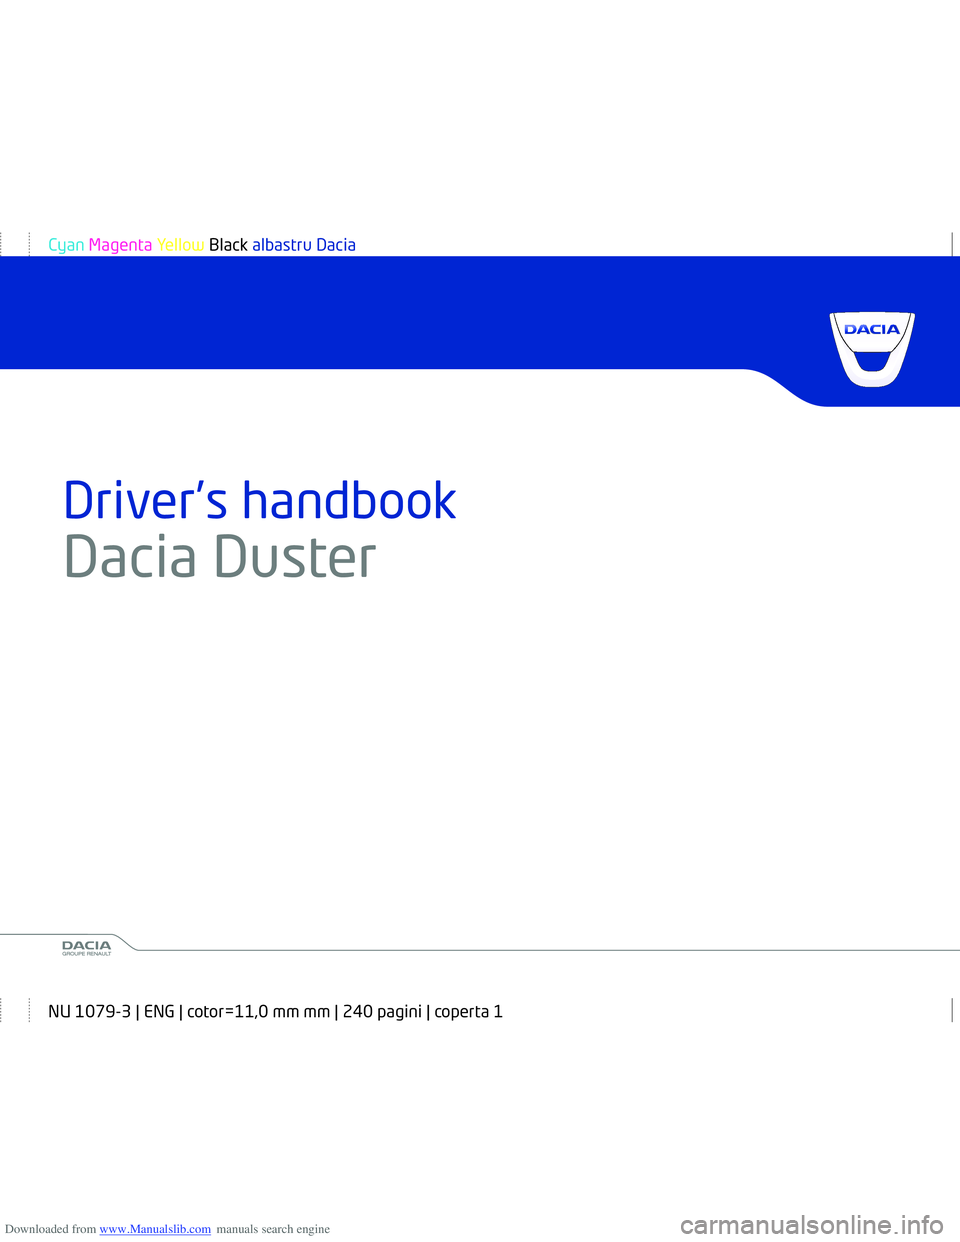 DACIA DUSTER 2015  Owners Manual Downloaded from www.Manualslib.com manuals search engine www.daciagroup.com
Driver’s handbook
Dacia  Duster        
Ref 999101781R / édition anglaiseNU 1079-3 - 07/2014
Cyan Magenta Yellow Black al